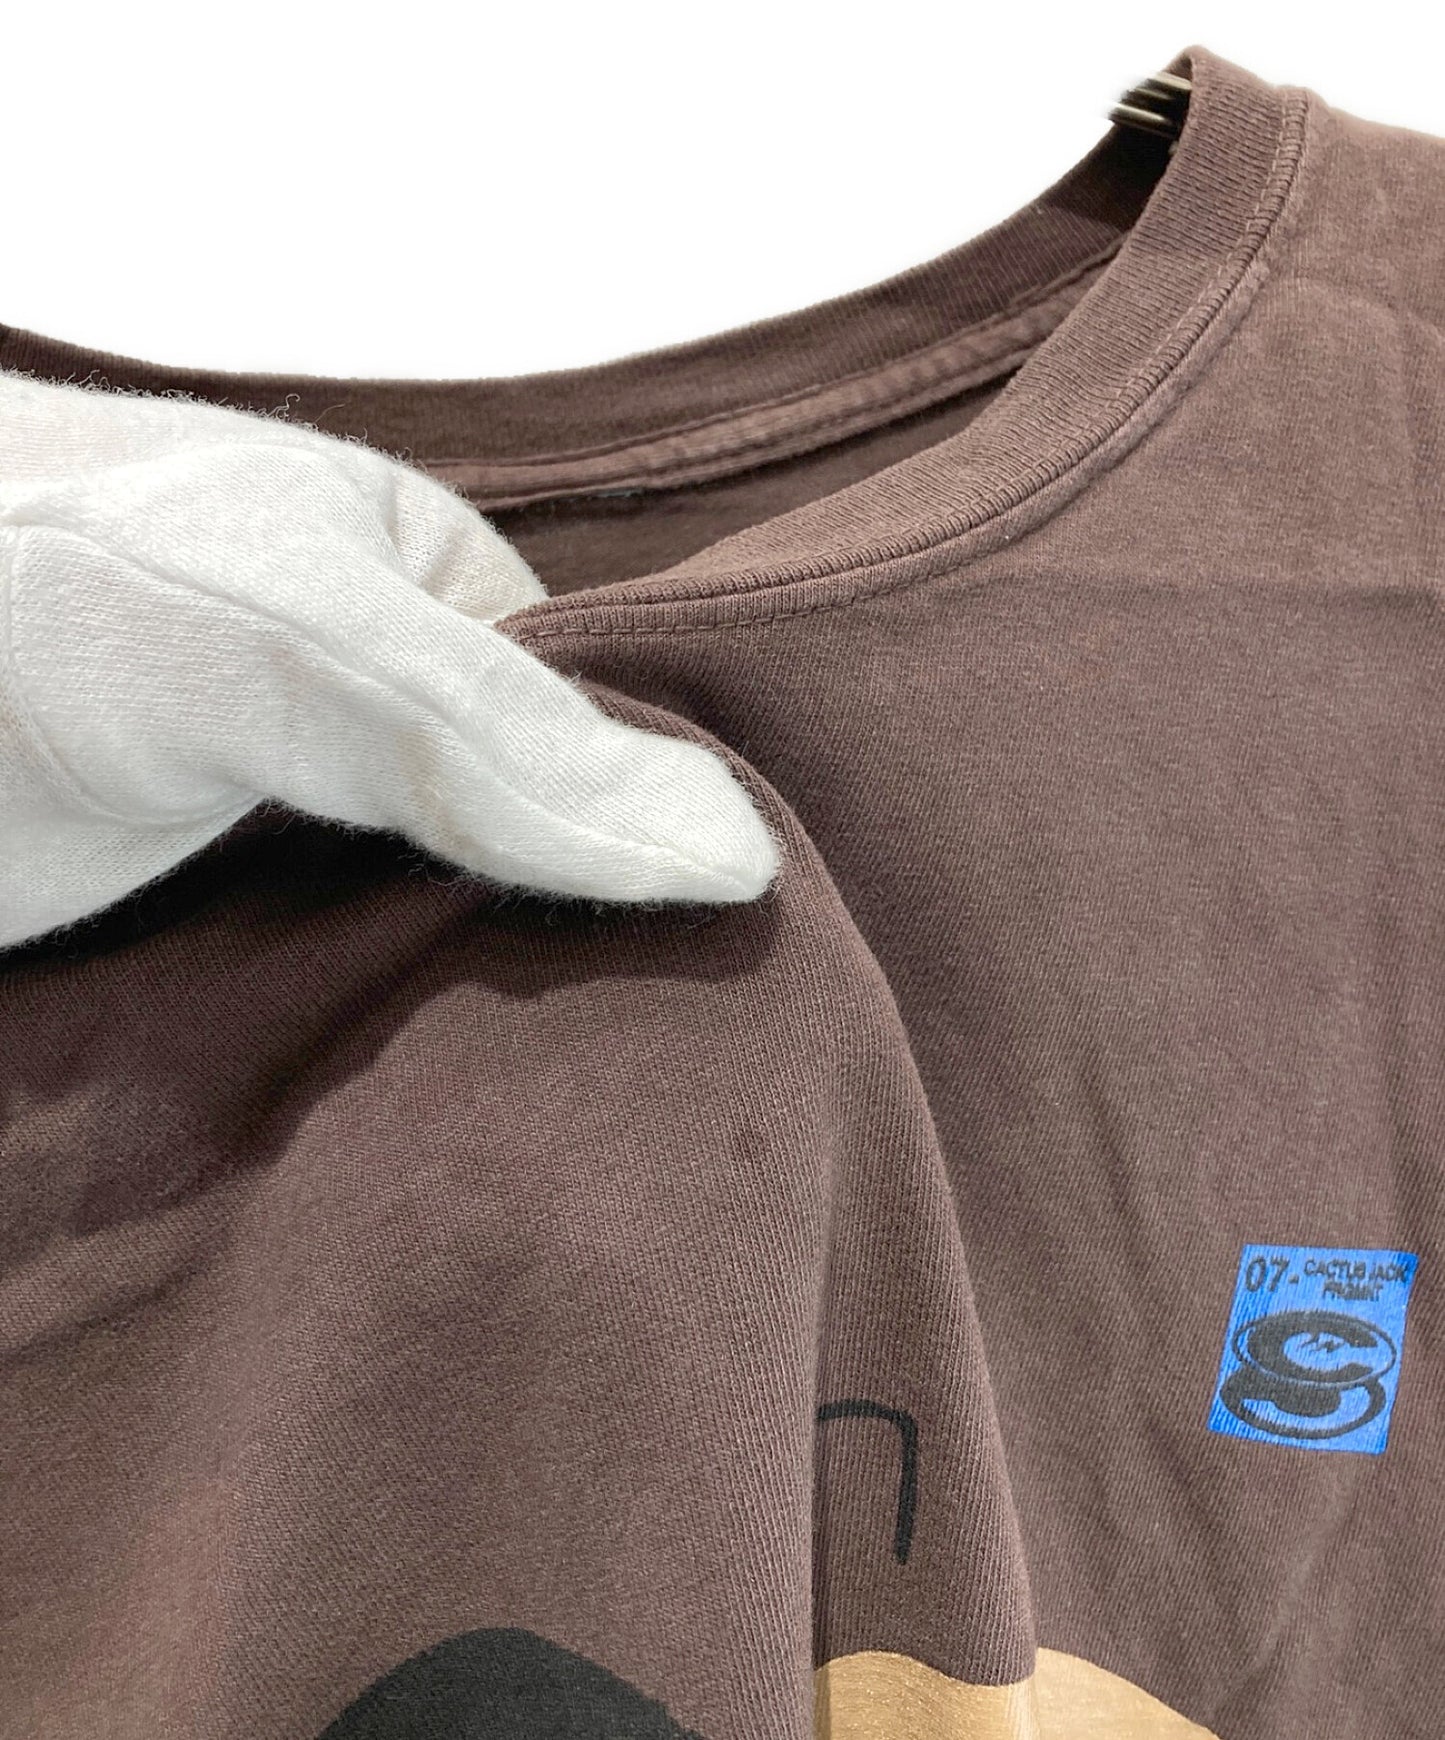 [Pre-owned] FRAGMENT DESIGN x Cactus Jack HIROSHI TEE / T-shirt / Short-sleeved cut and sewn